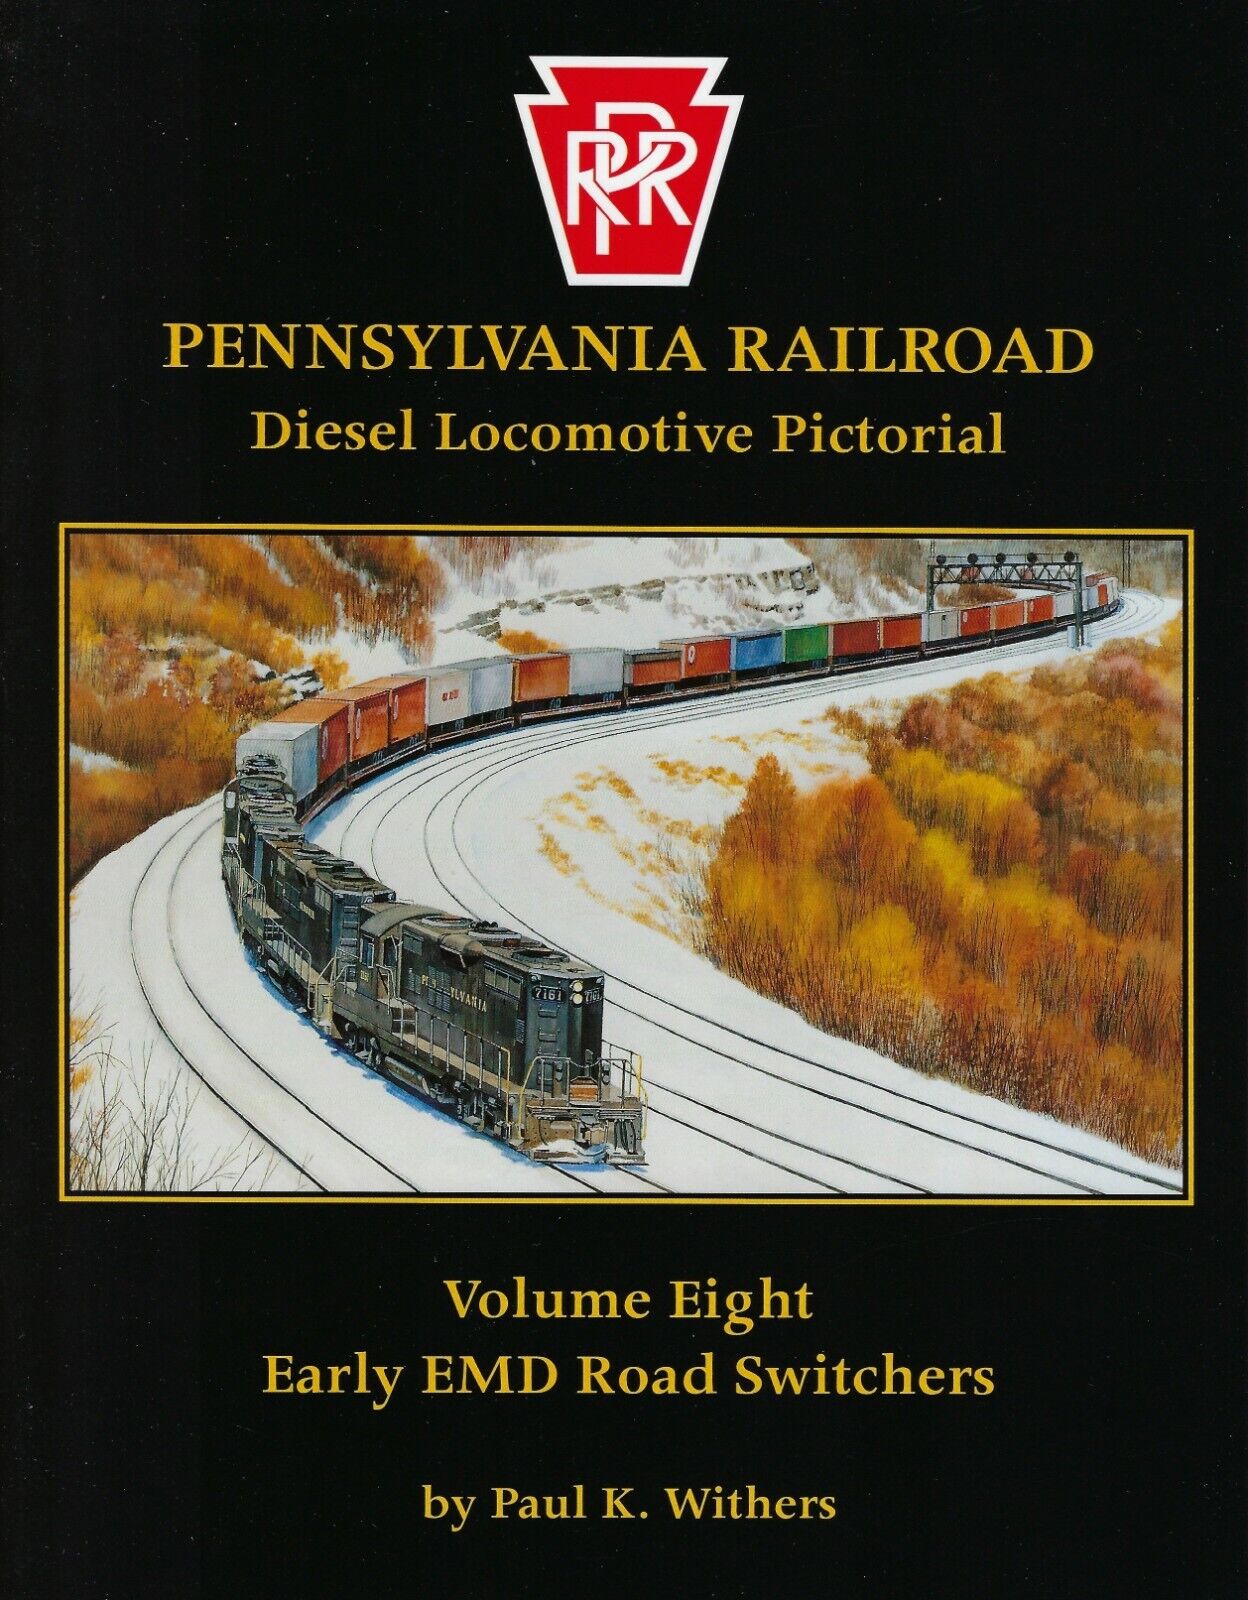 PRR Diesel Locomotive Pictorial, Vol. 8 – Early EMD Road Switchers (NEW BOOK)